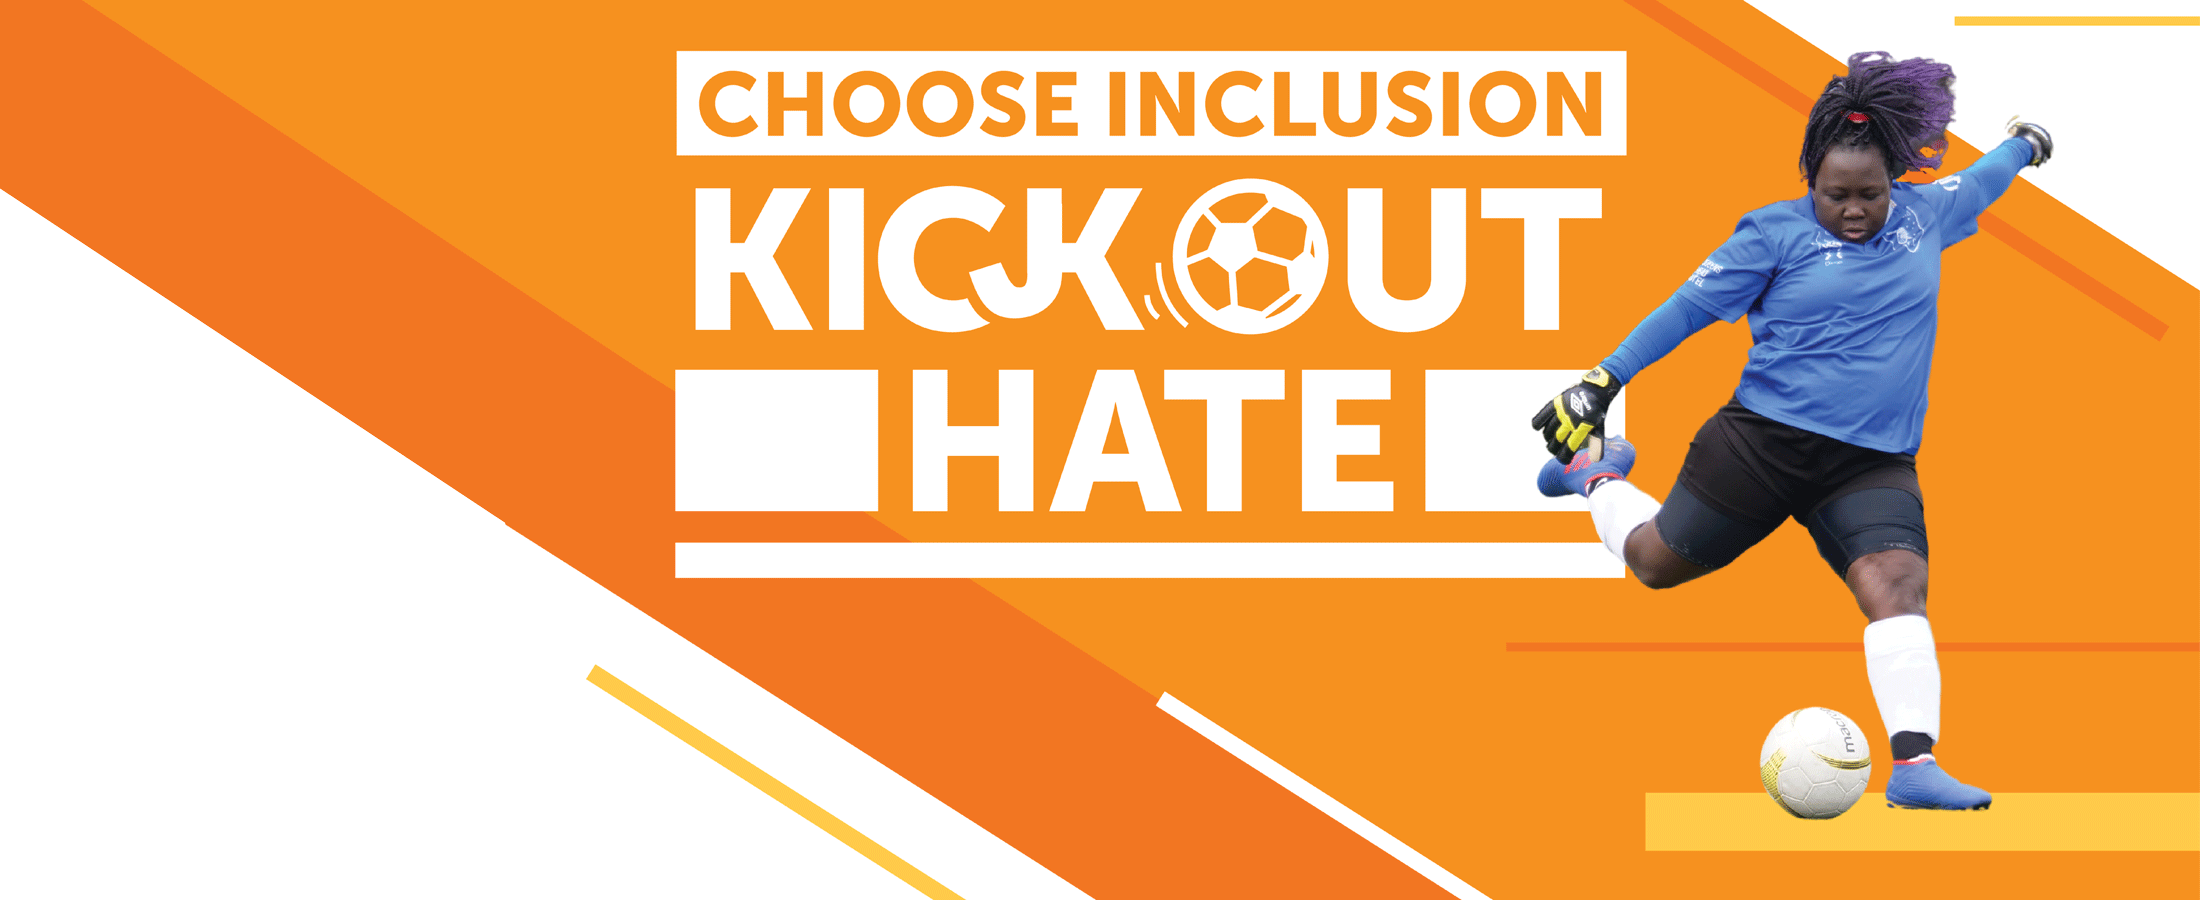 Harnessing the world game to kick out hate